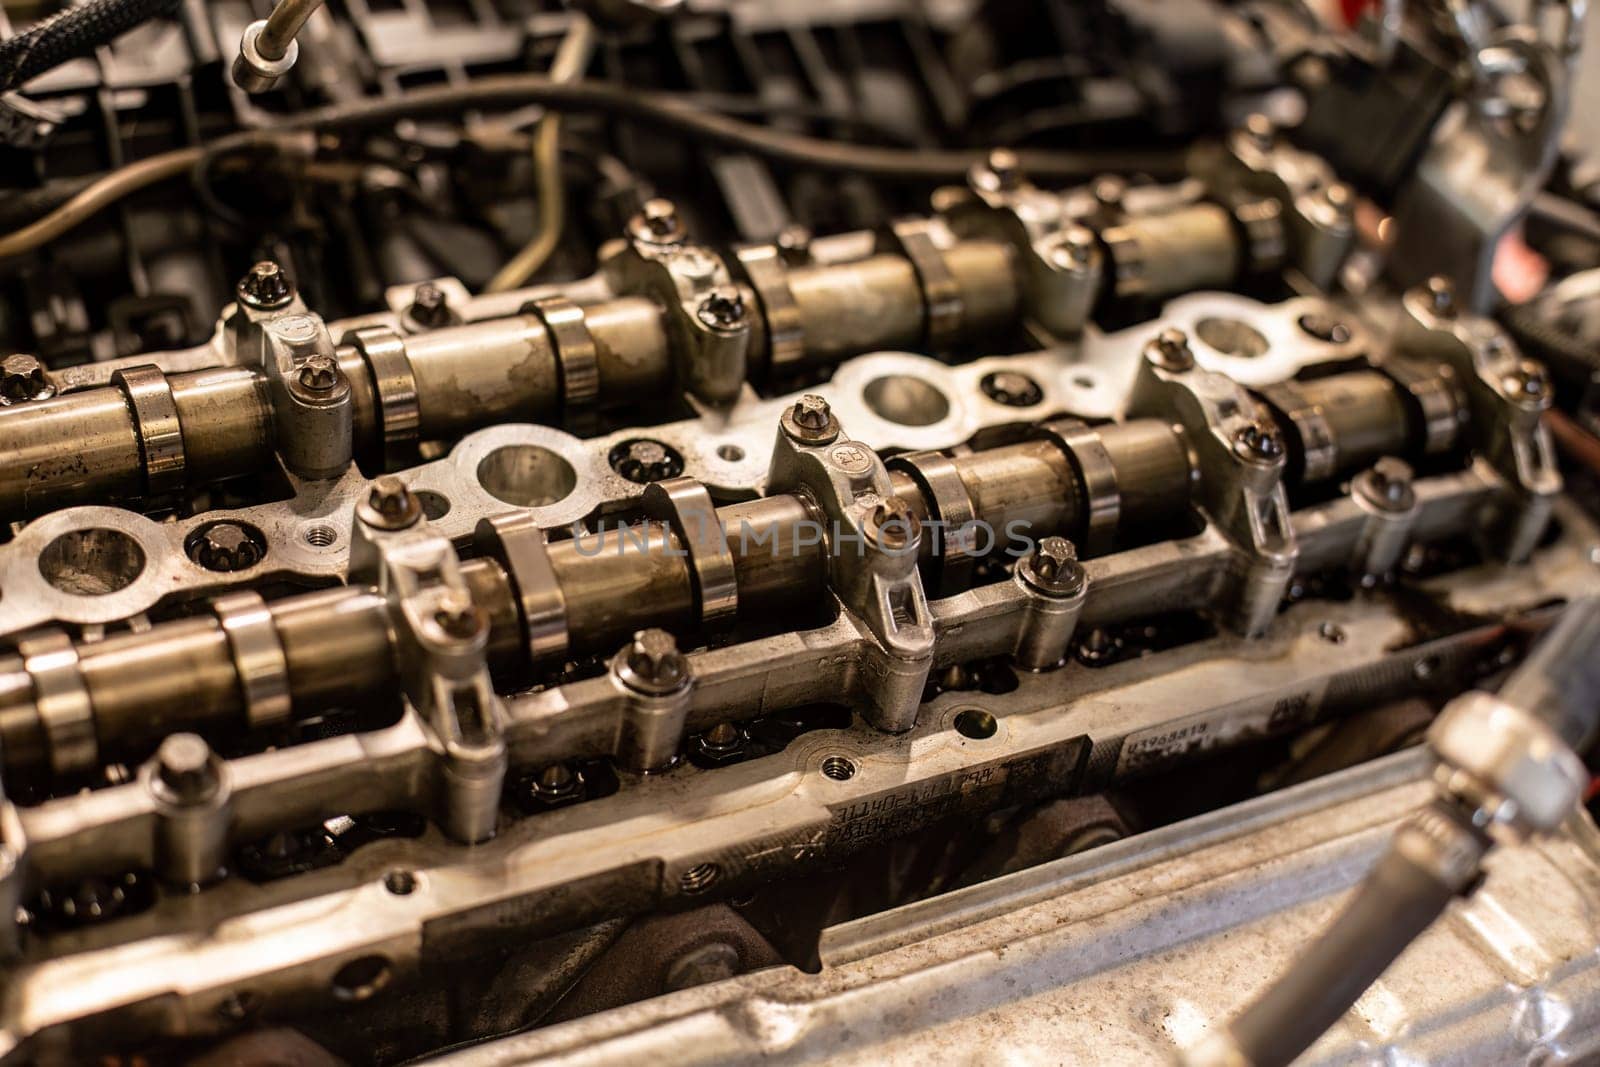 Close-up of a car's disassembled engine showing camshaft detail during workshop repair.